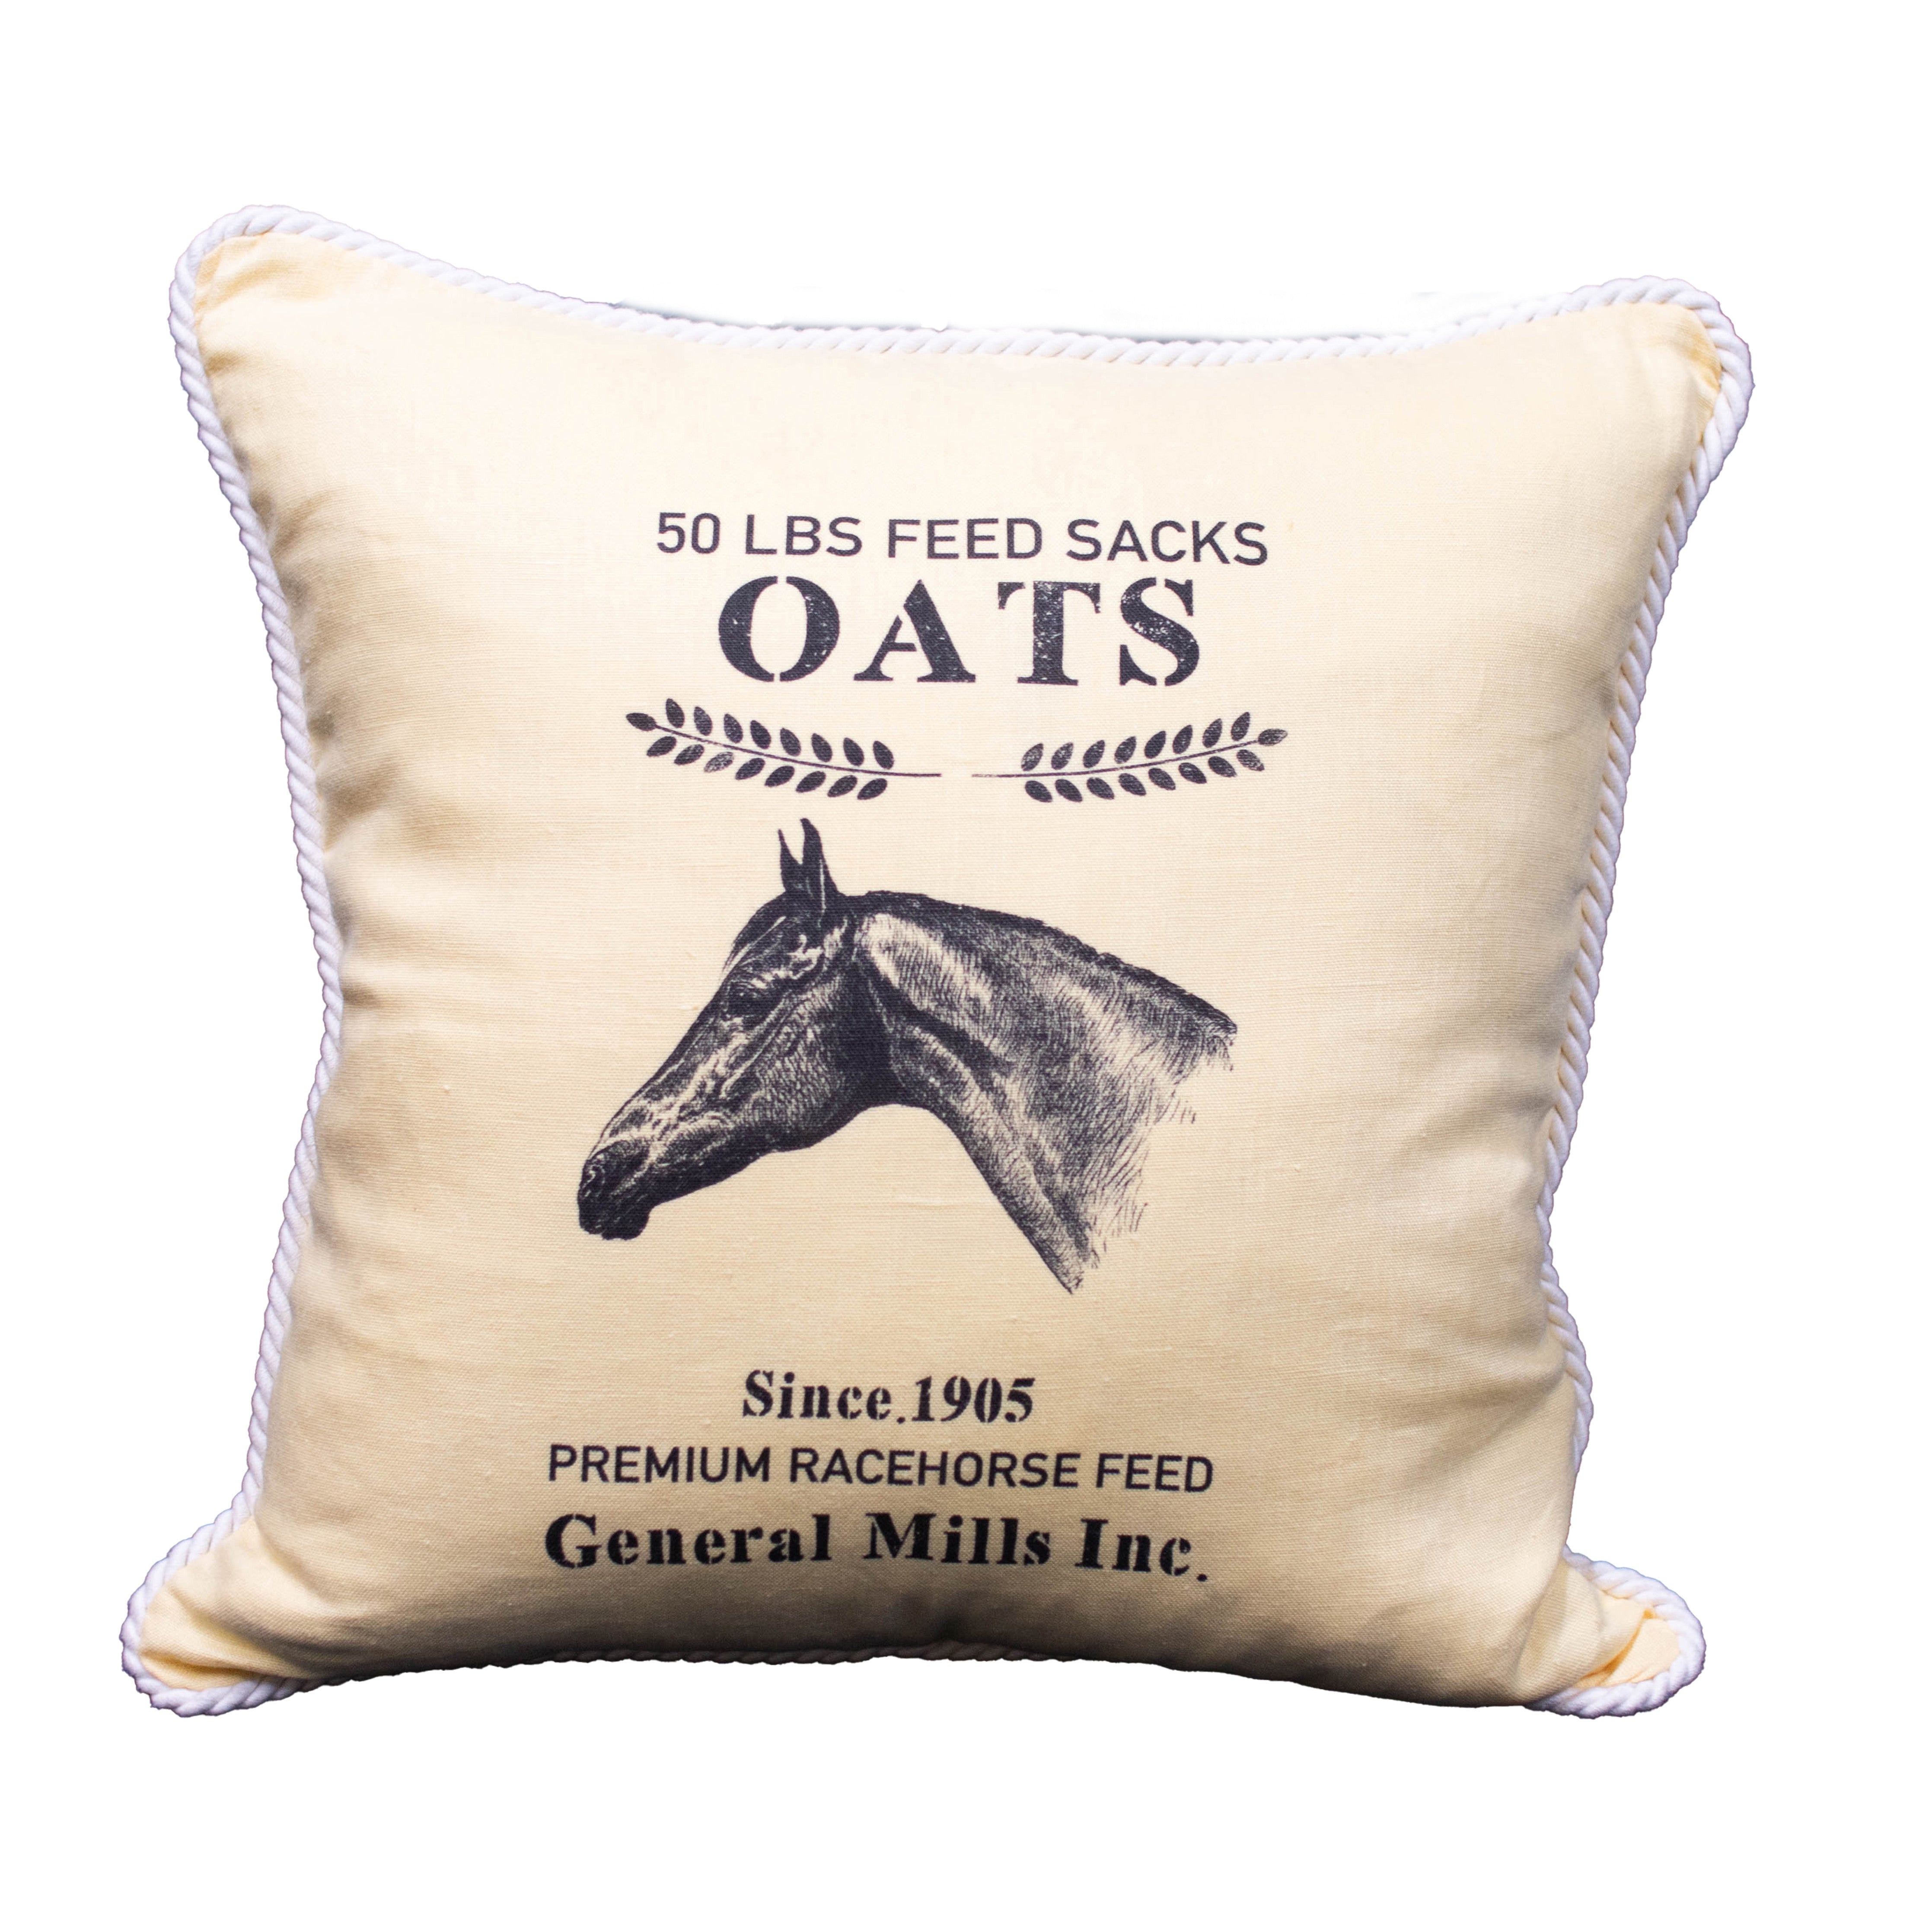 Ox Bow Corded Linen Pillow